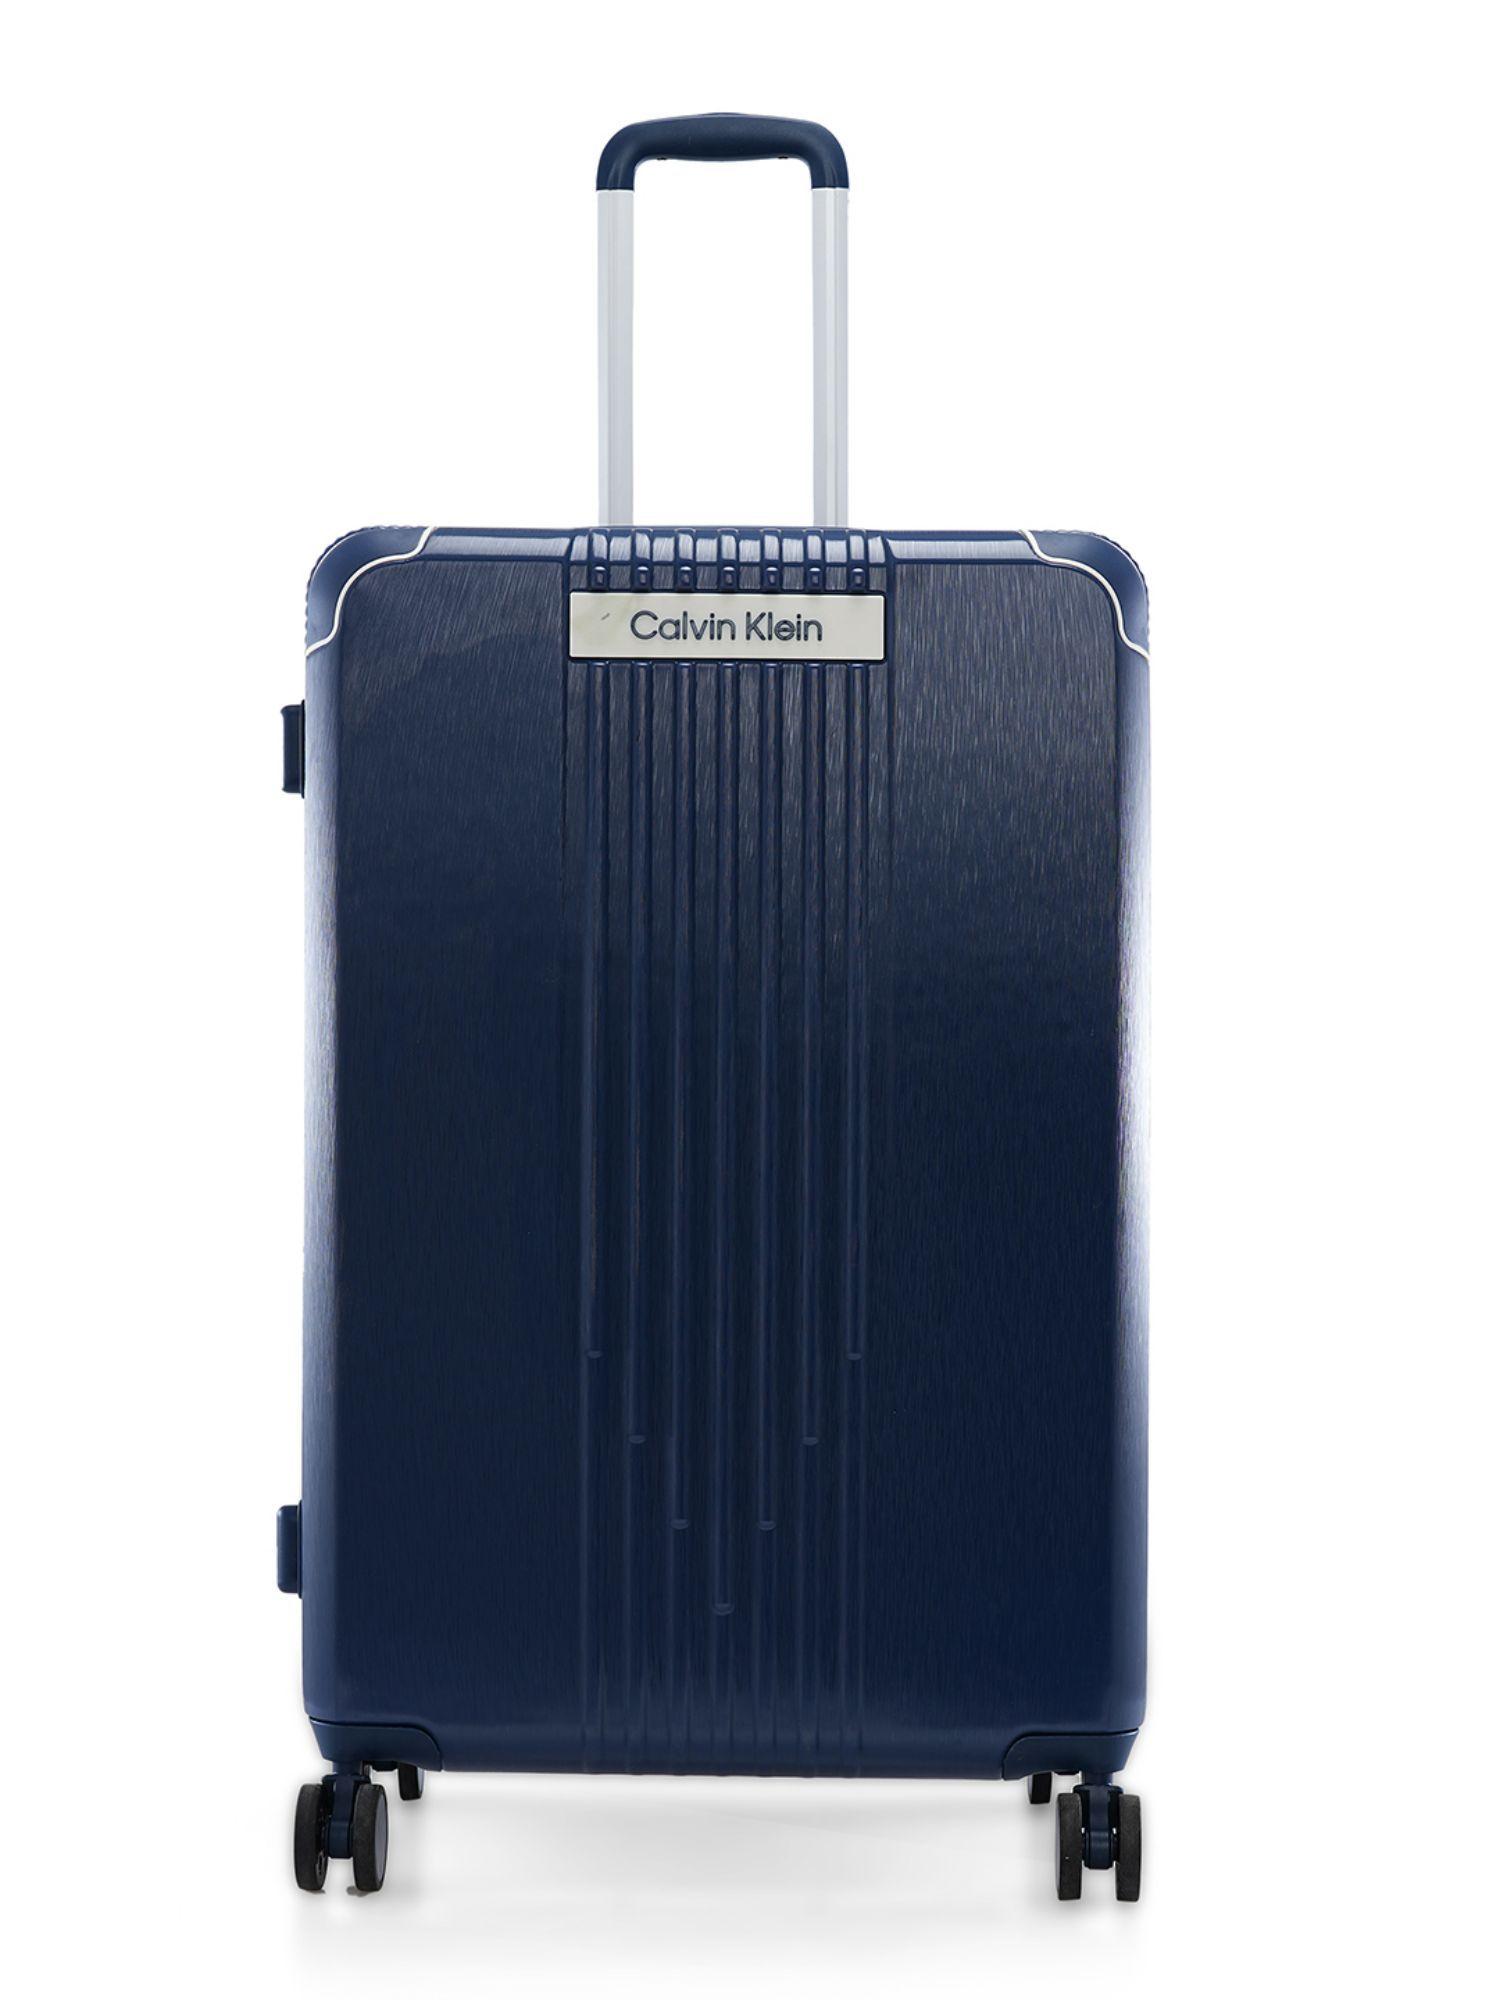 reliant insignia blue 100 precent polycarbonate material hard 20 cabin trolley